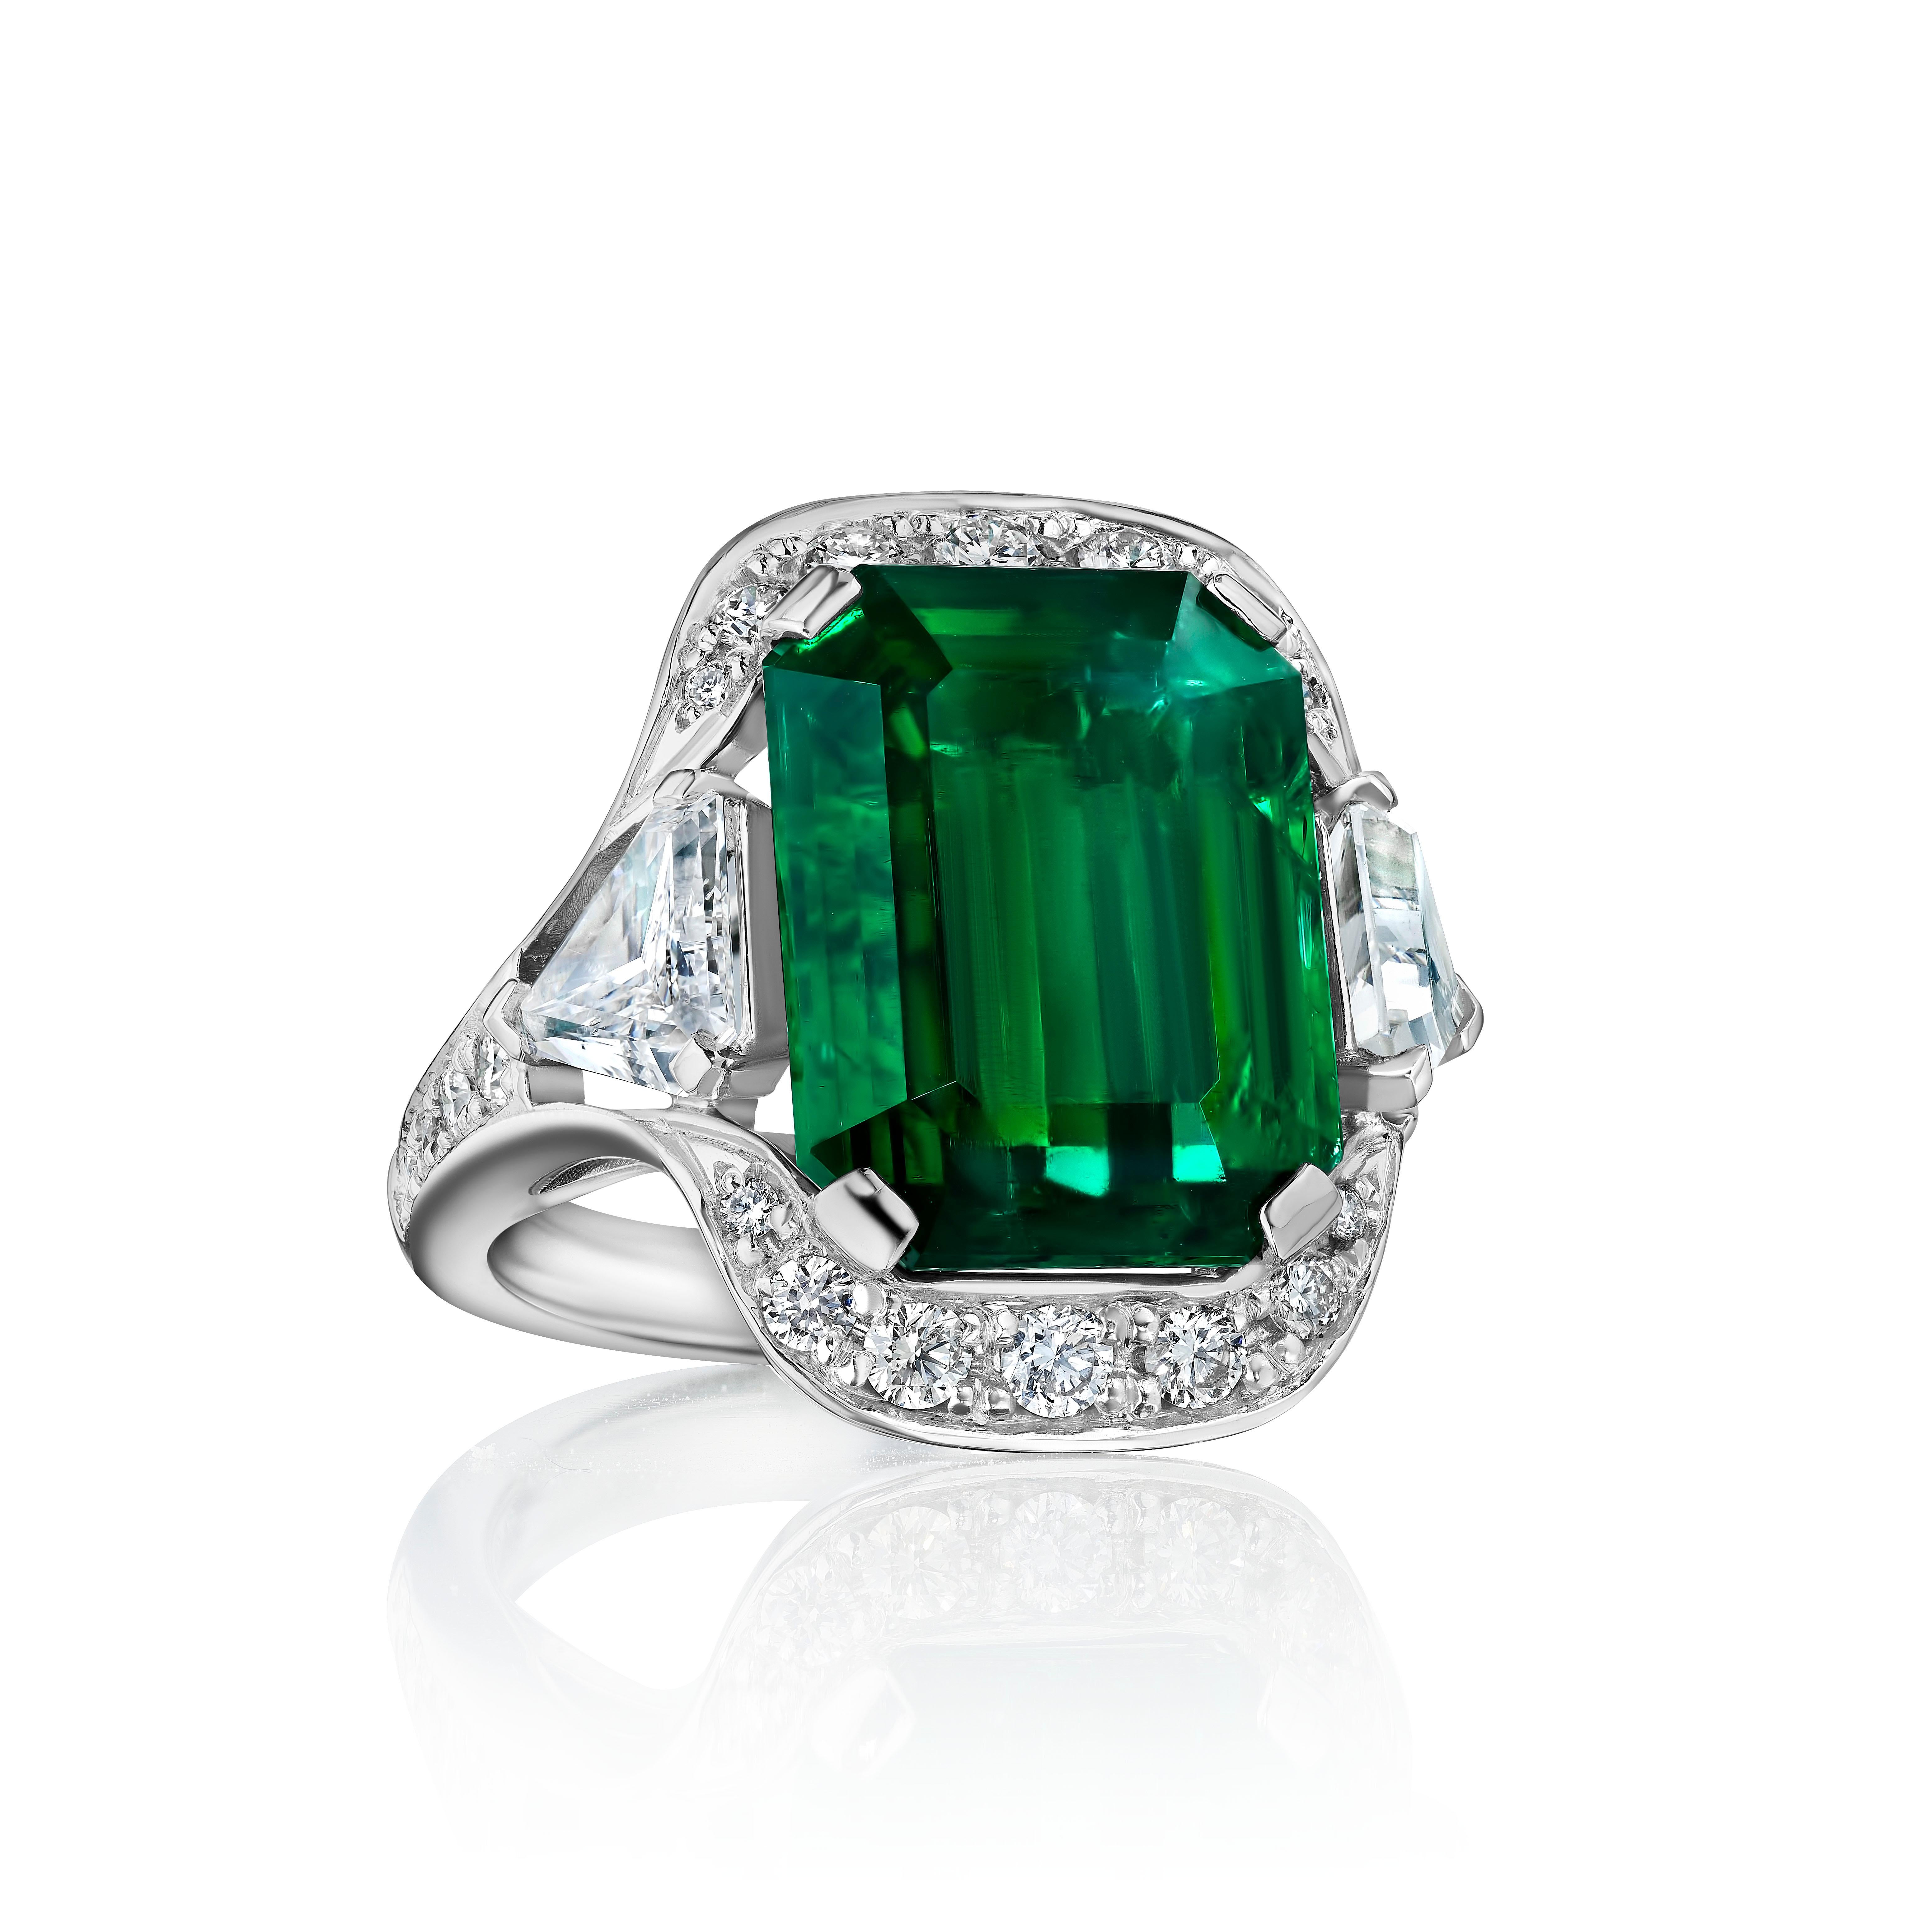 Centered upon a Emerald Cut Emerald weighing 10.08 Carats, flanked by Step Cut Trapezoid Shaped Diamonds weighing 1.43 Carats. Certified by AGL.

Flanked by shield Cut Diamonds weighing 1.64 Carats and embellished with 22 Round Diamonds weighing